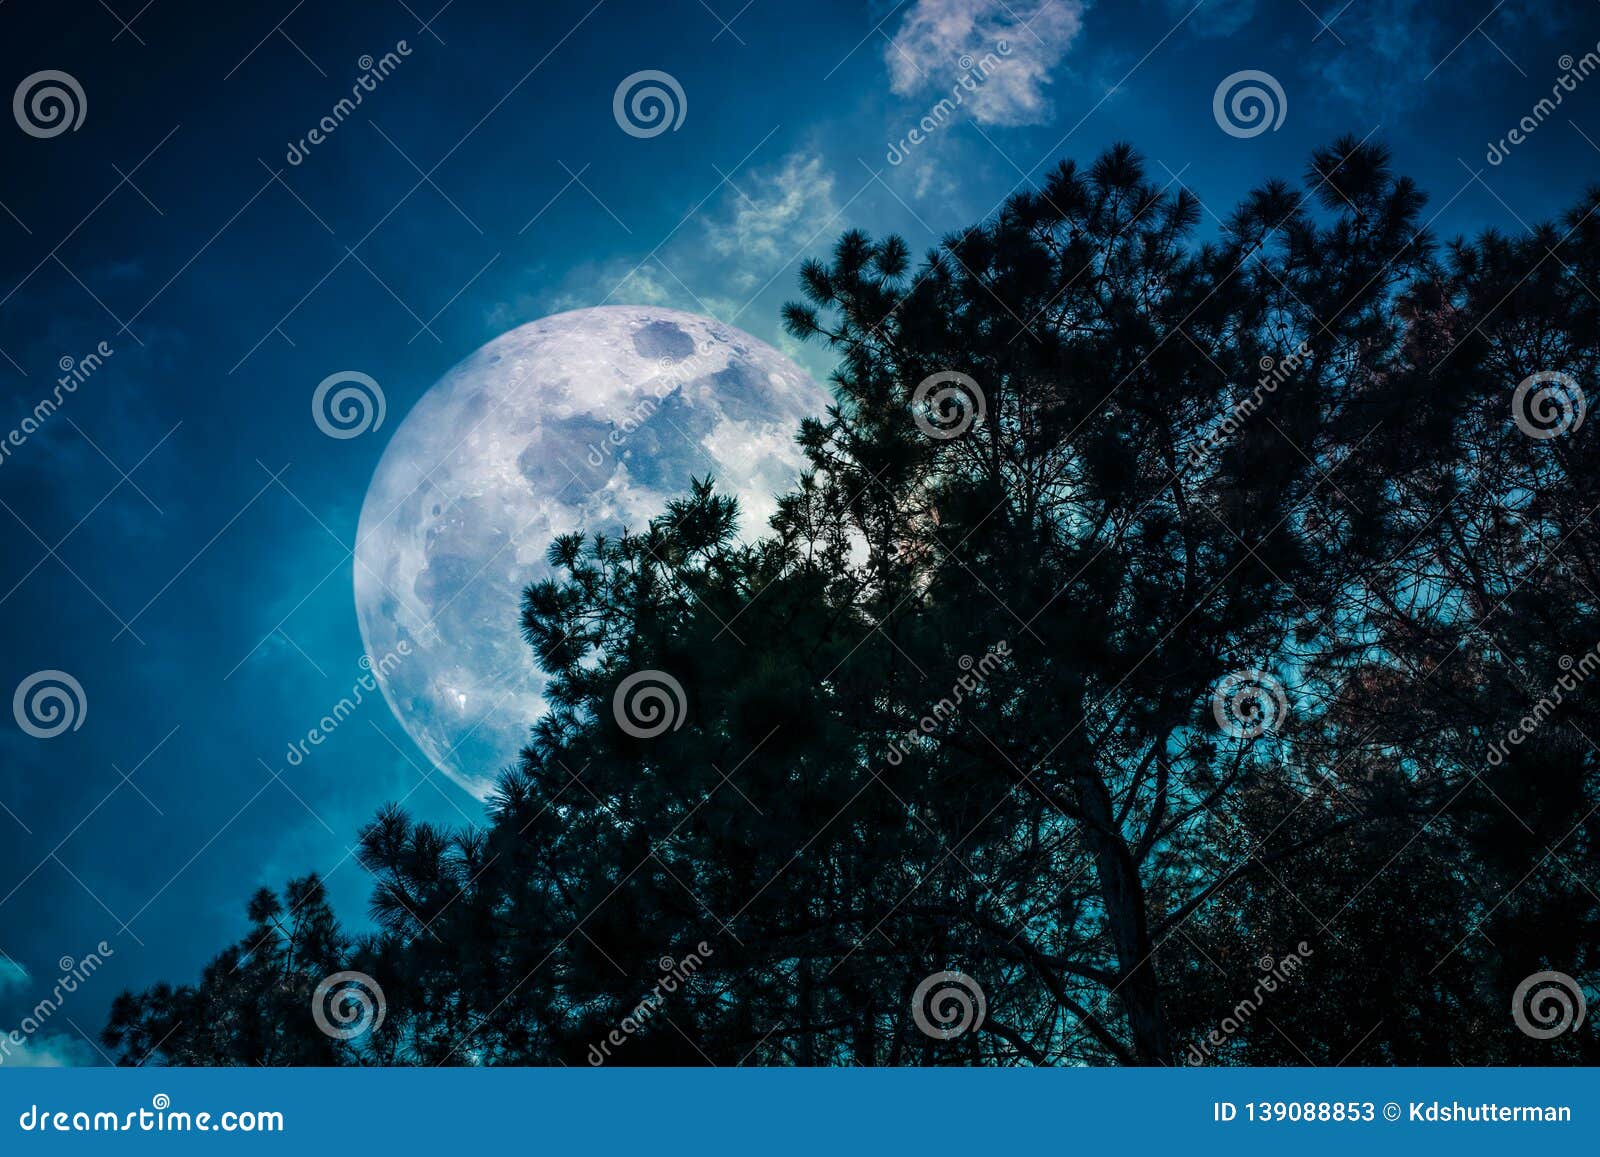 silhouette of trees against sky and super moon over serenity nature background